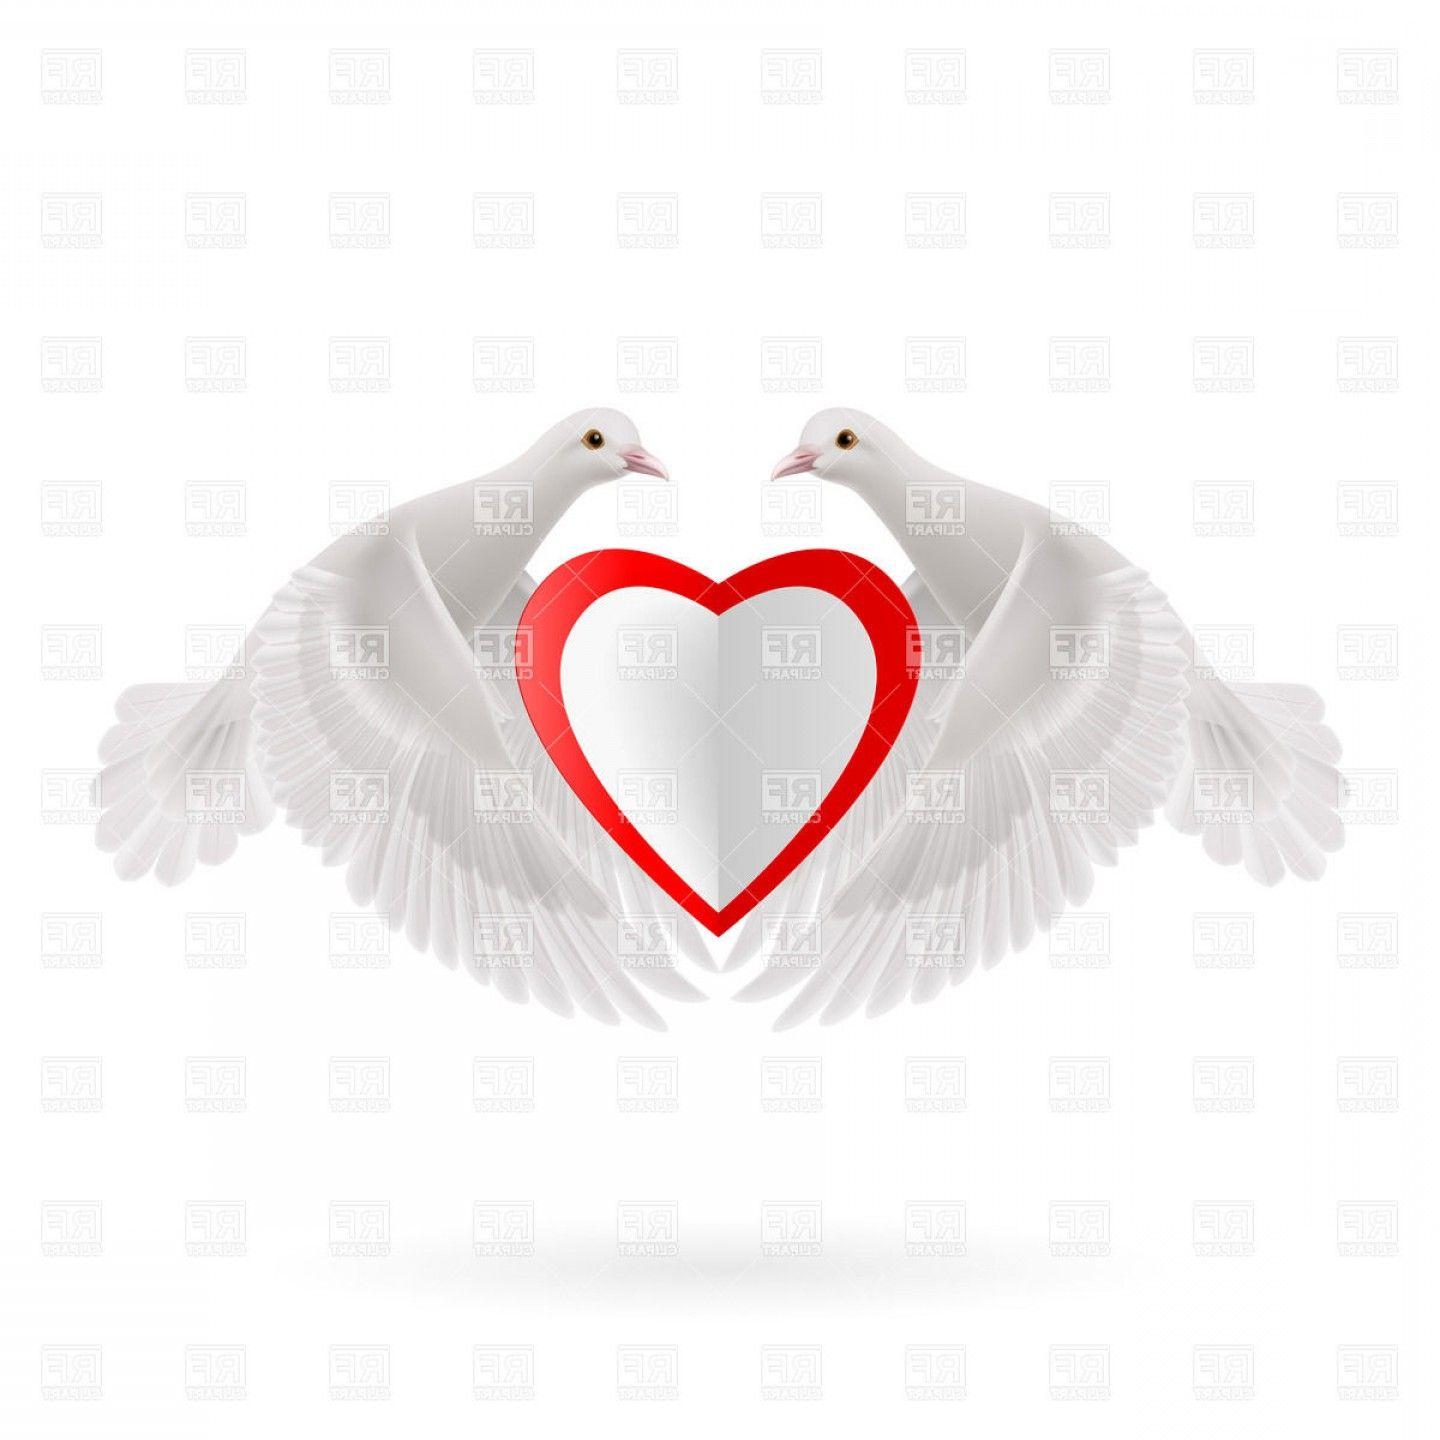 Red White Heart Logo - White Heart With Red Edging Between Two Doves Vector Clipart | SOIDERGI